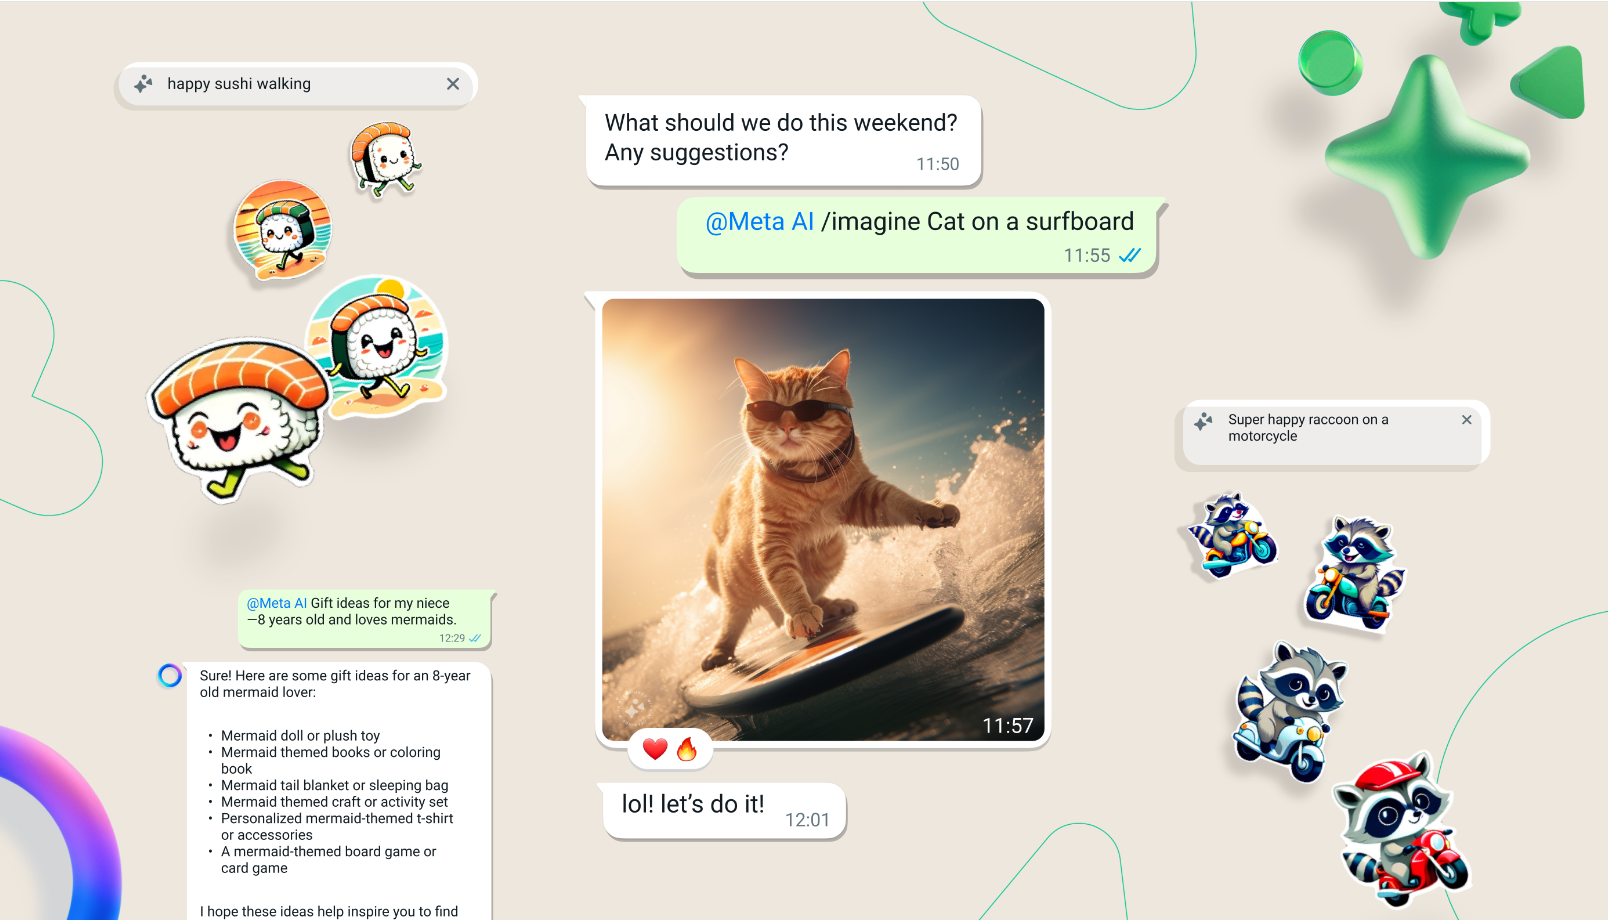 Meta introduces AI-powered image creation in WhatsApp chats using the word "Imagine."